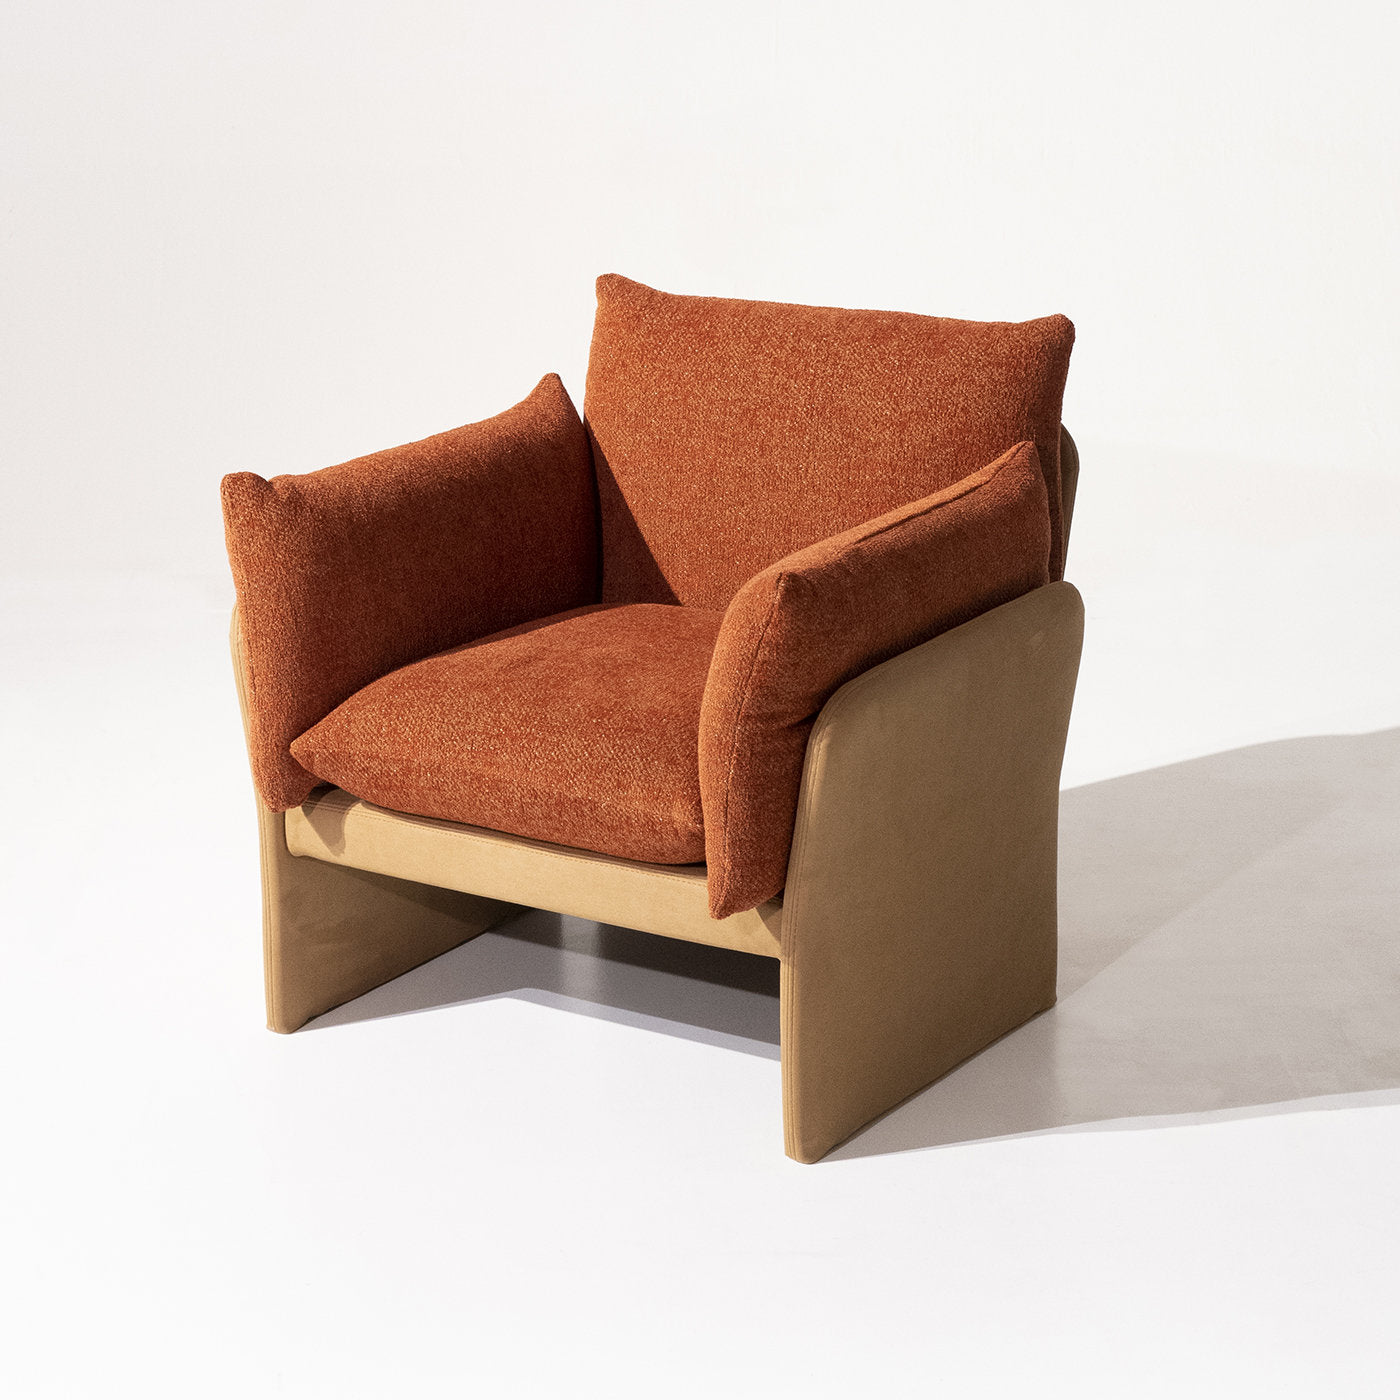 Farfalle Armchair Tribeca Collection by Marco and Giulio Mantellassi - Alternative view 1